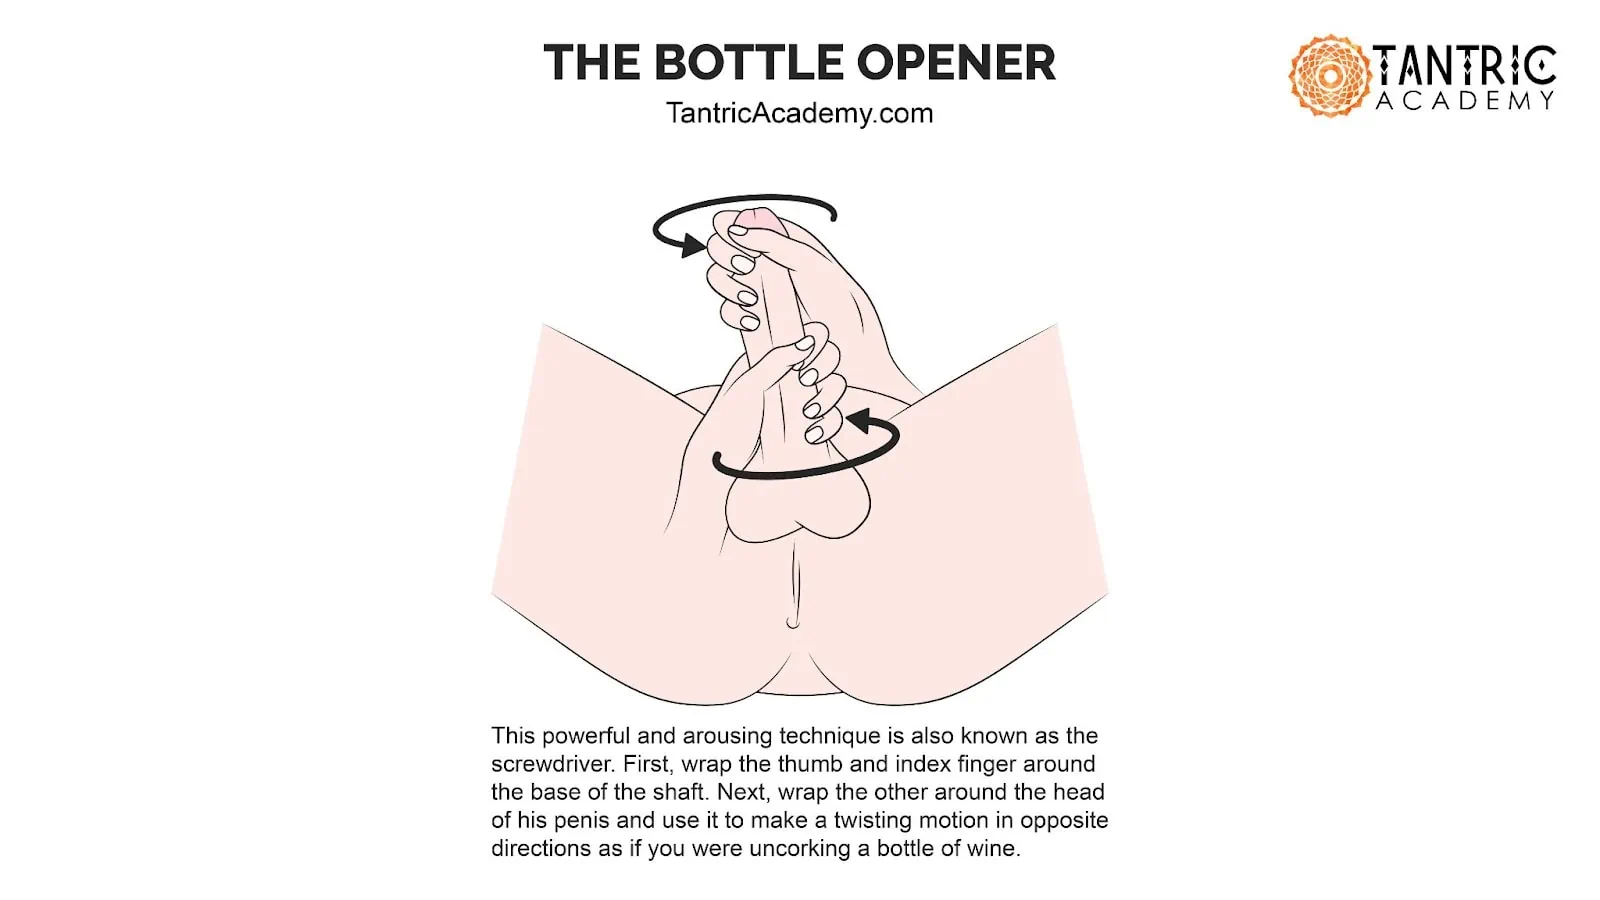 The Bottle Opener graphic